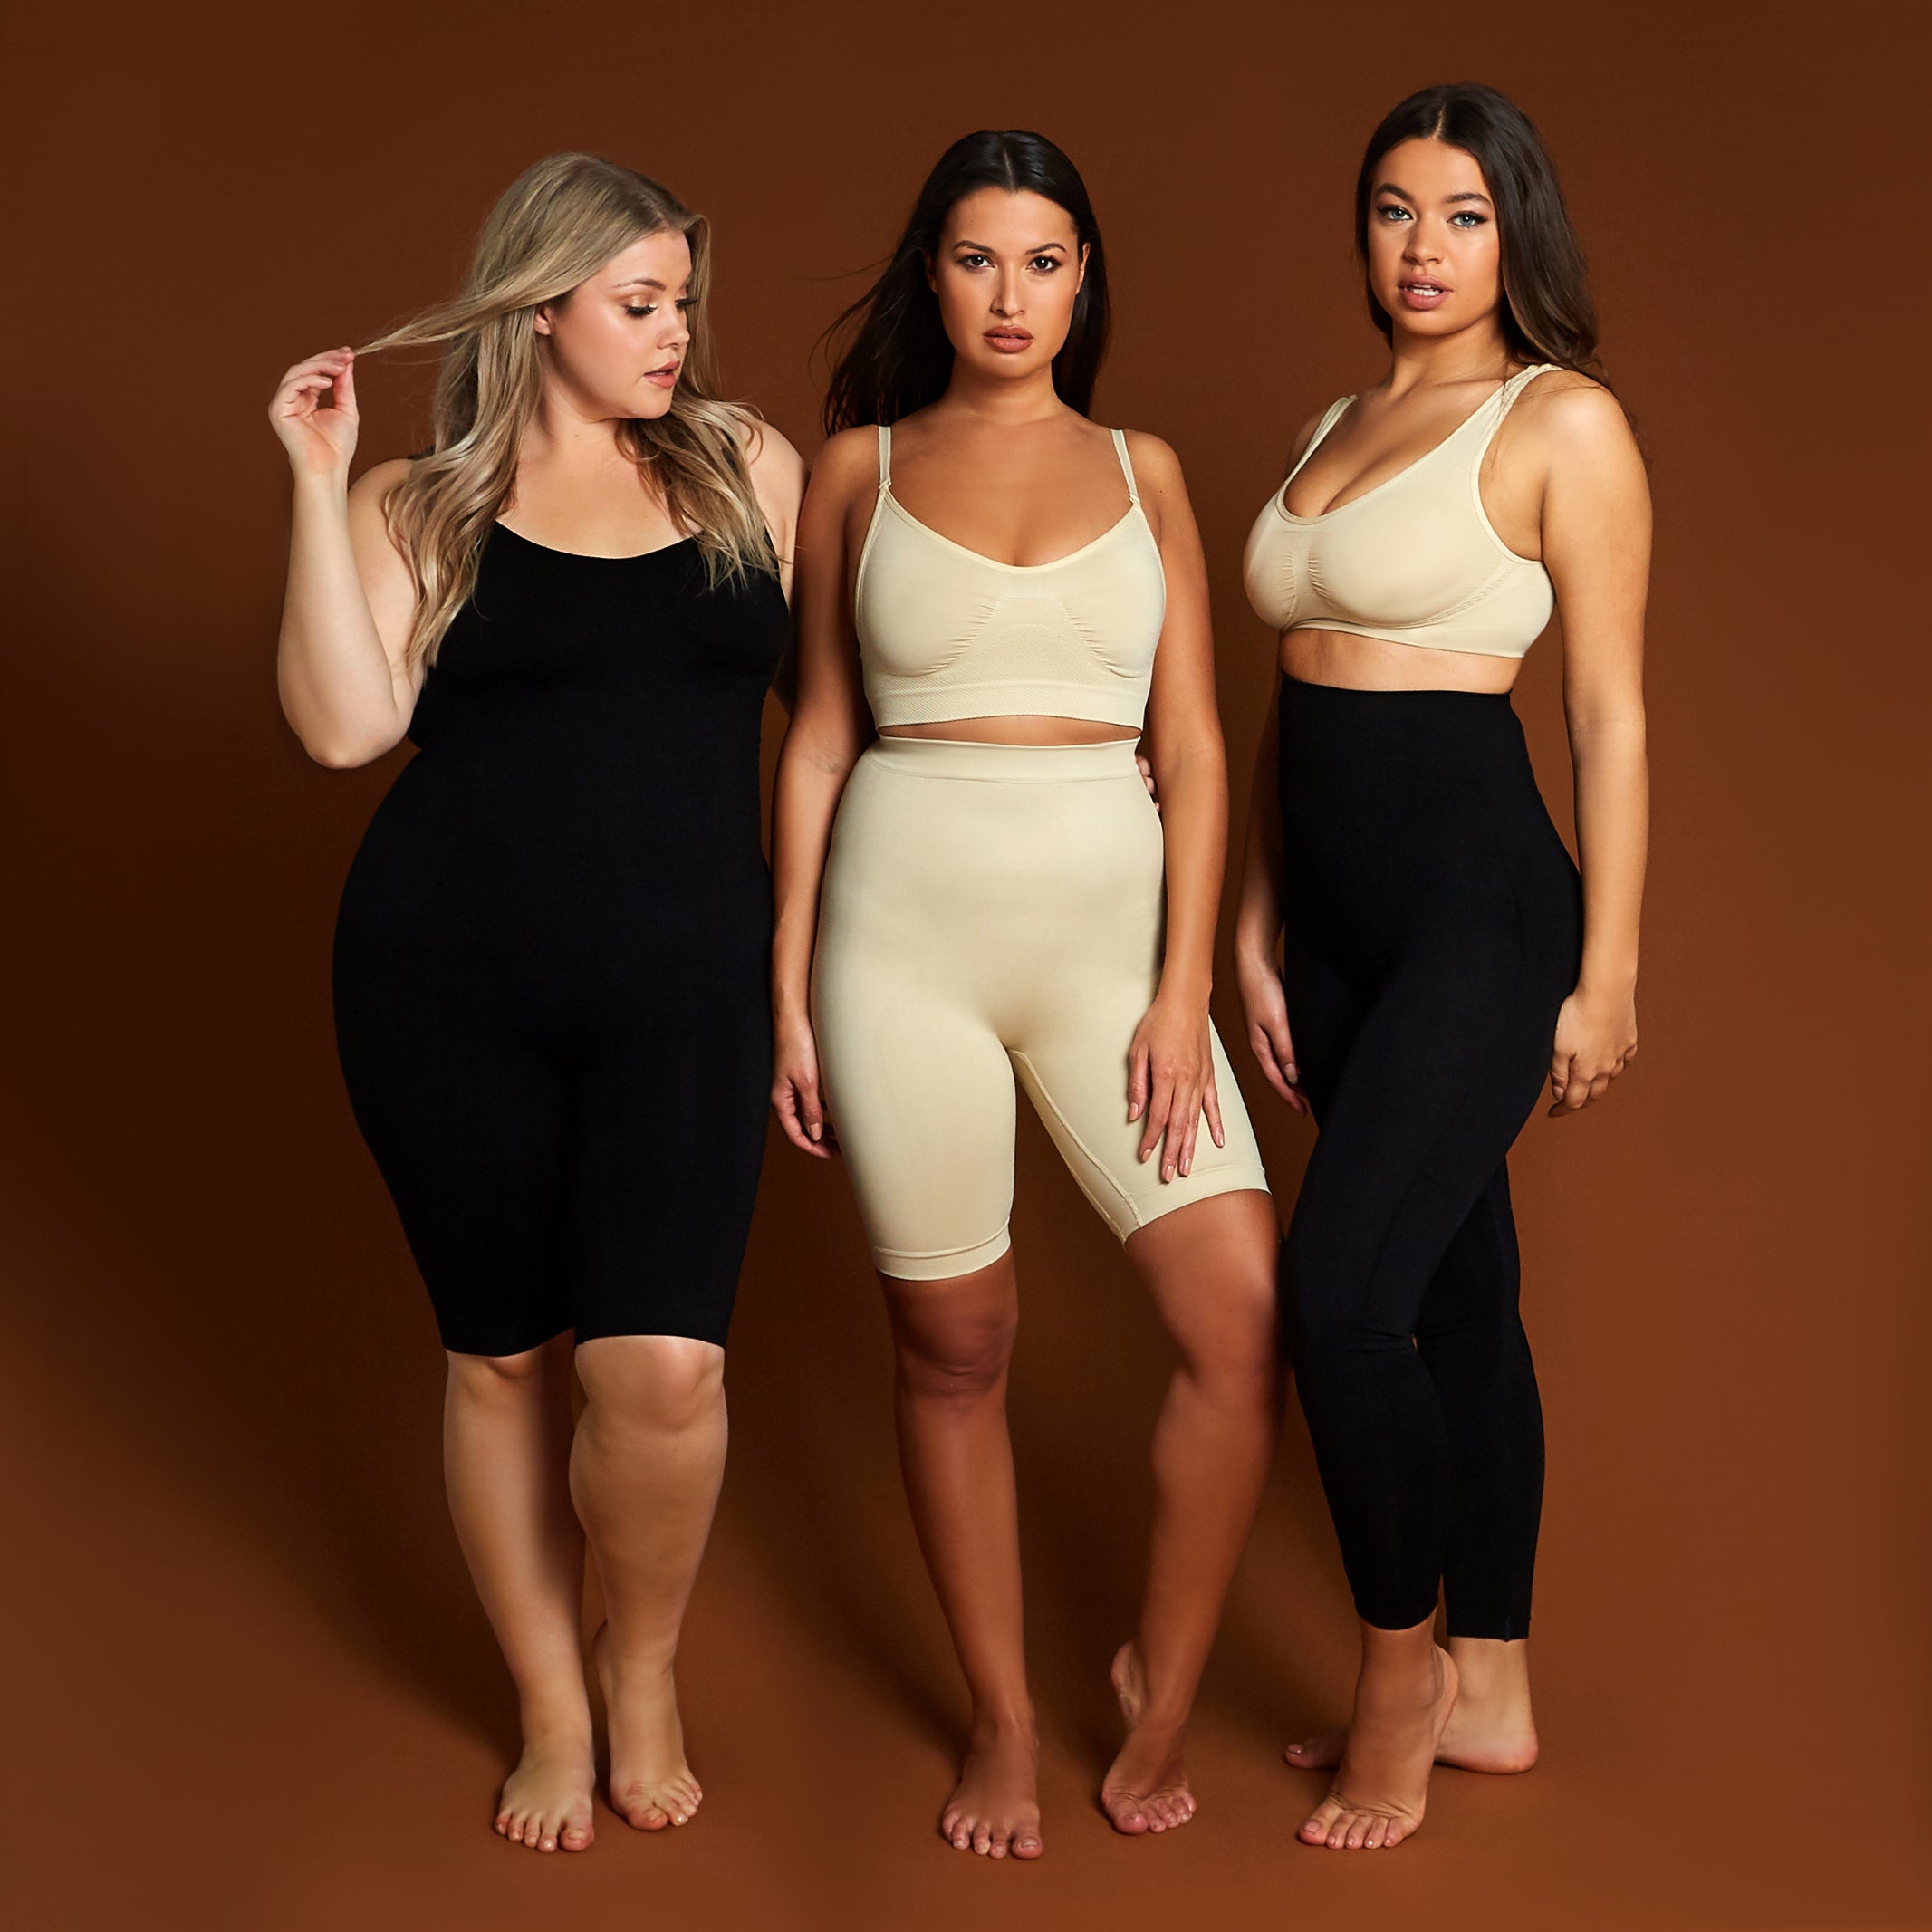 The Ultimate Guide to Choosing the Right Shapewear for Your Body